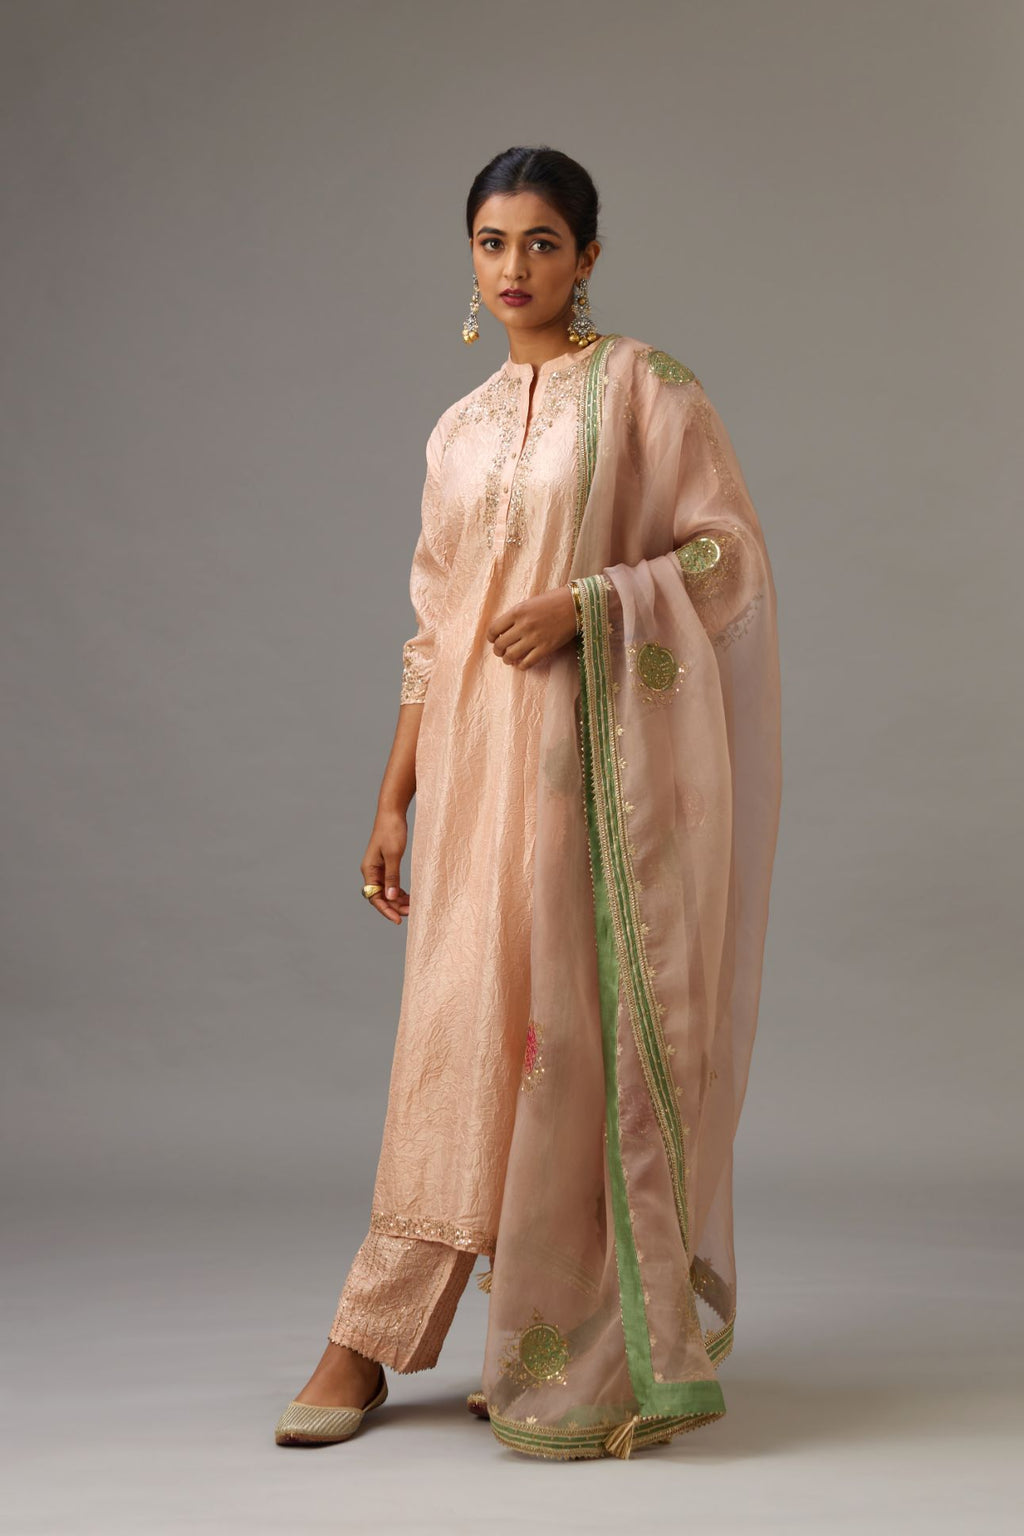 Pink silk hand crushed kurta set with button placket neckline, highlighted with gold sequins work at hem, neck and armhole.